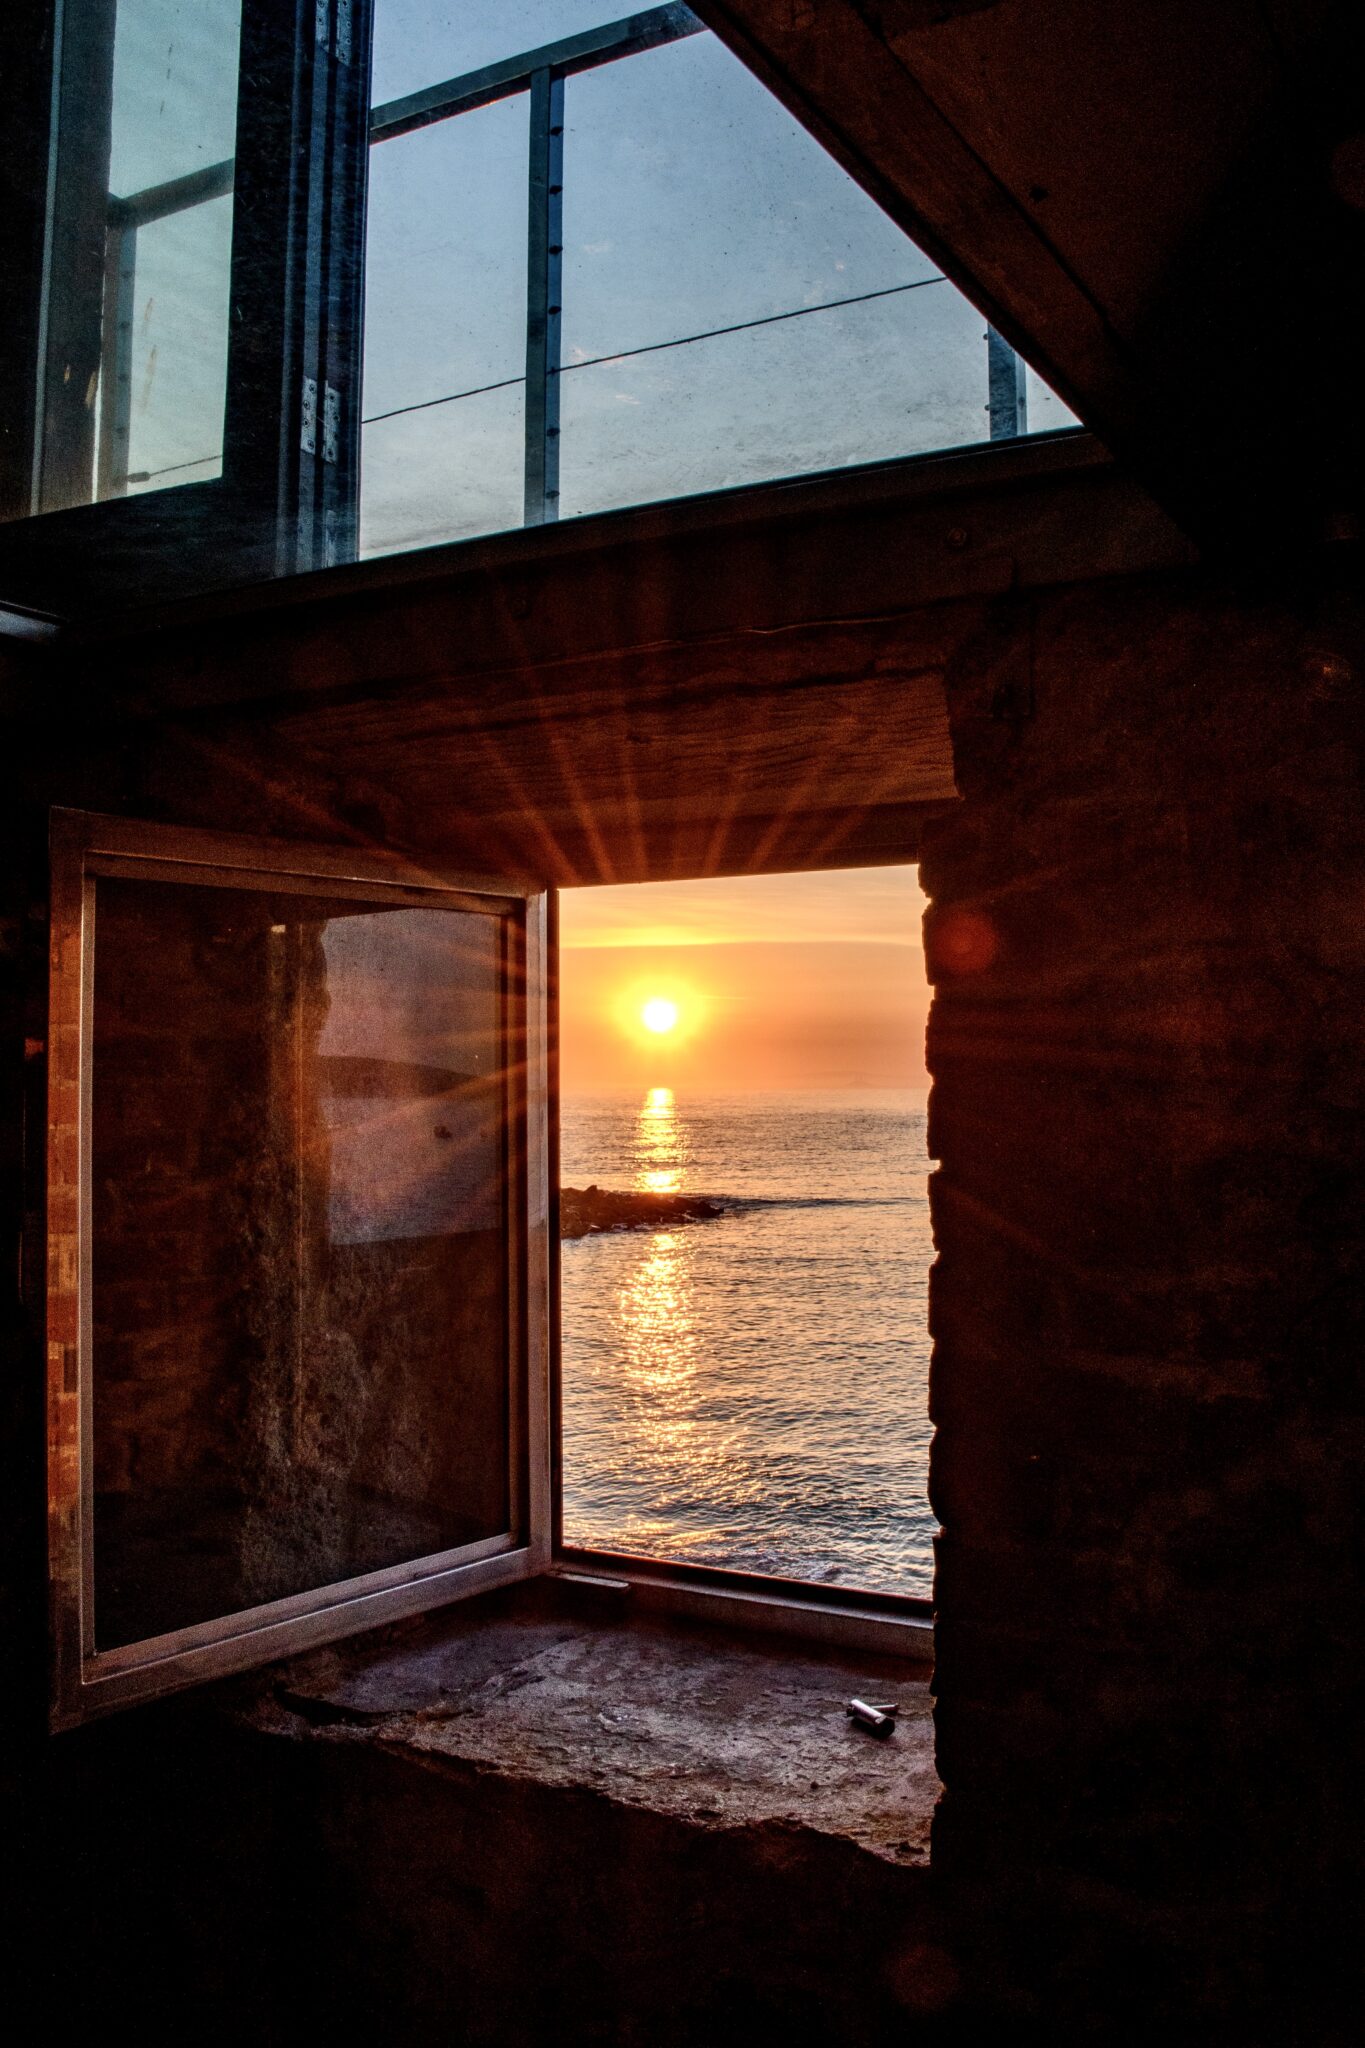 A small window in a stone wall with a view of the sunrise over the sea